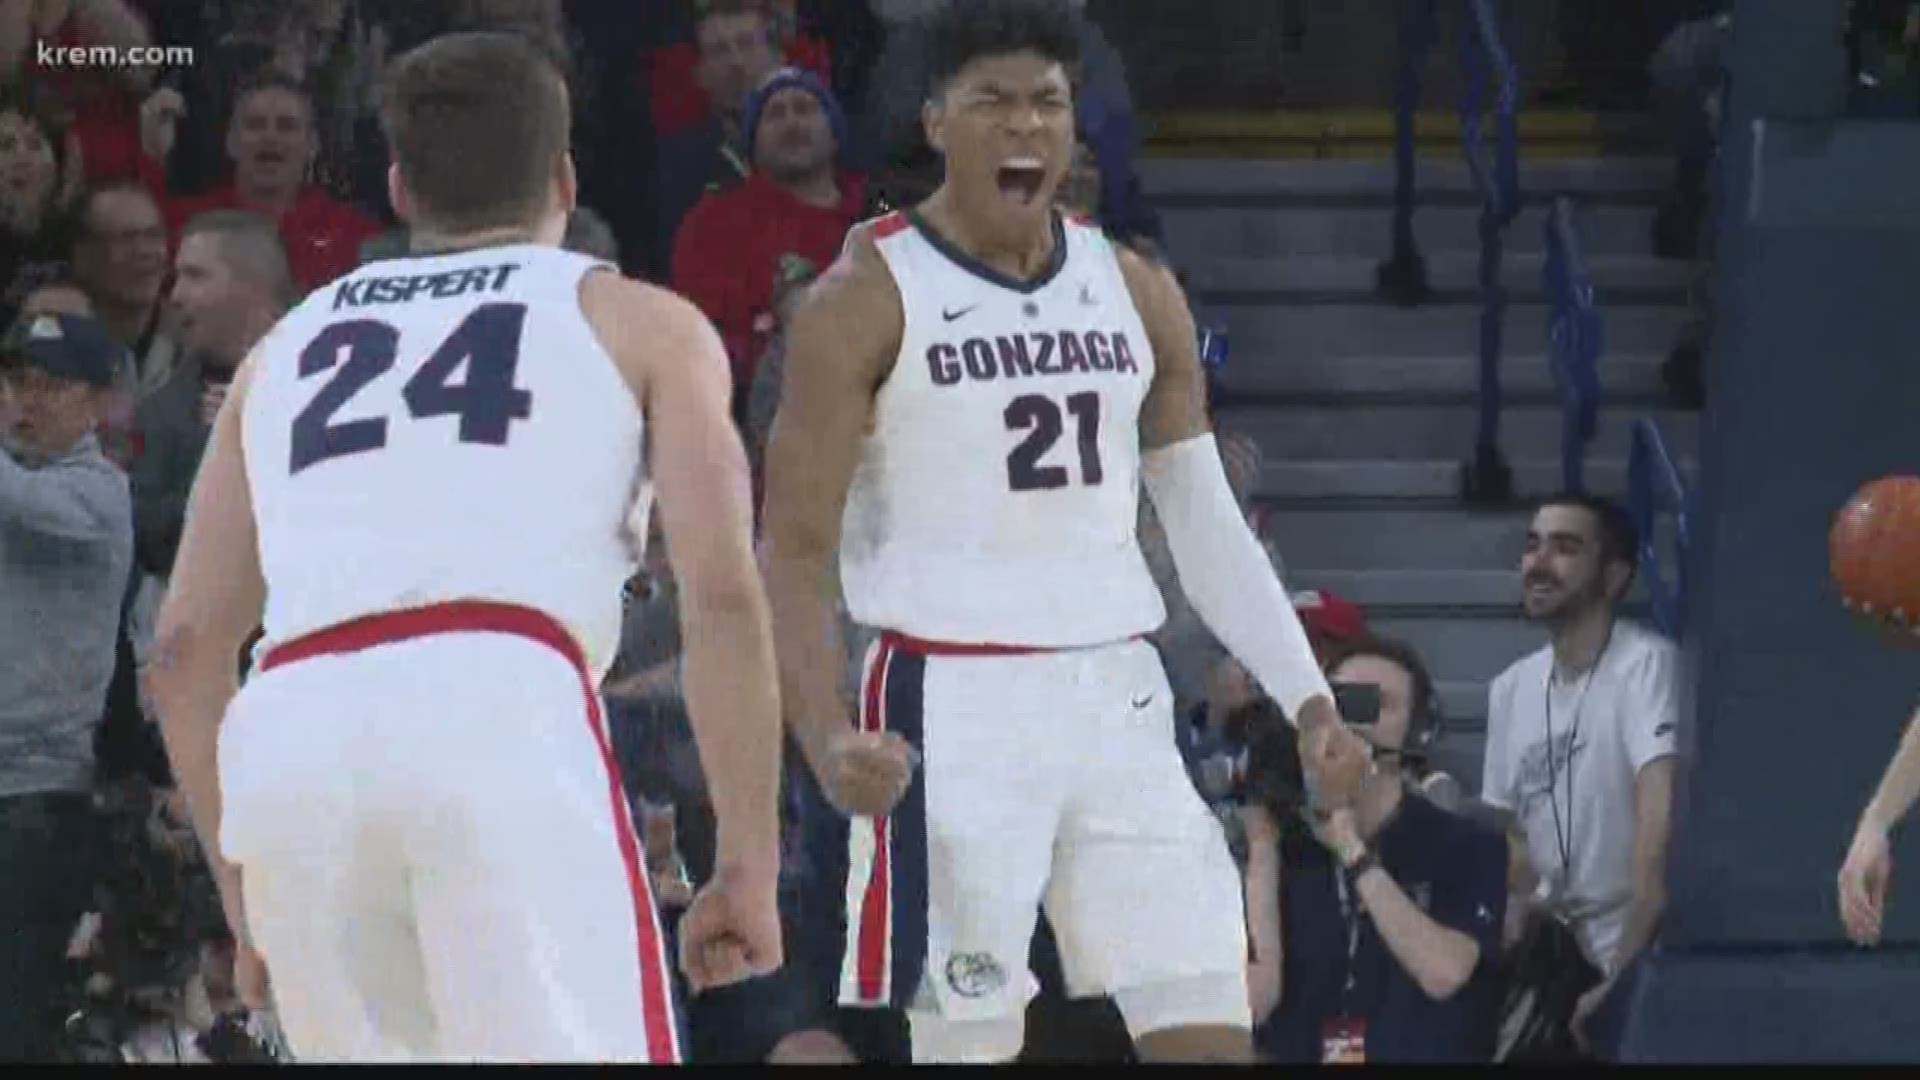 Brandon Clarke scored 24 points and blocked three shots as No. 4 Gonzaga routed Saint Mary's 94-46 on Saturday night for its 14th consecutive victory.